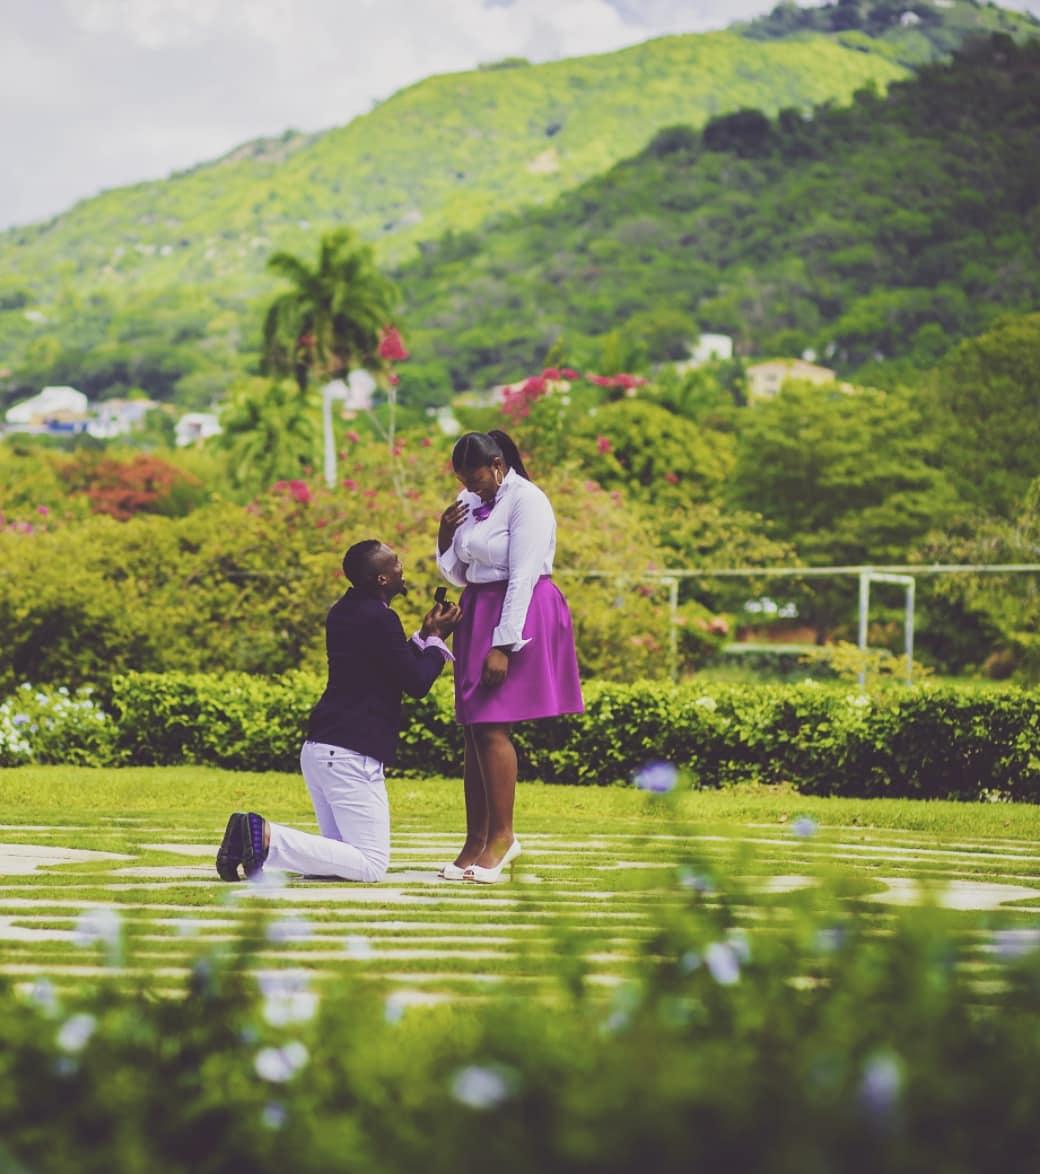 These Afro Caribbean Cute Wedding Proposals and Love Stories Left Us ‘Aww-struck’ in 2019